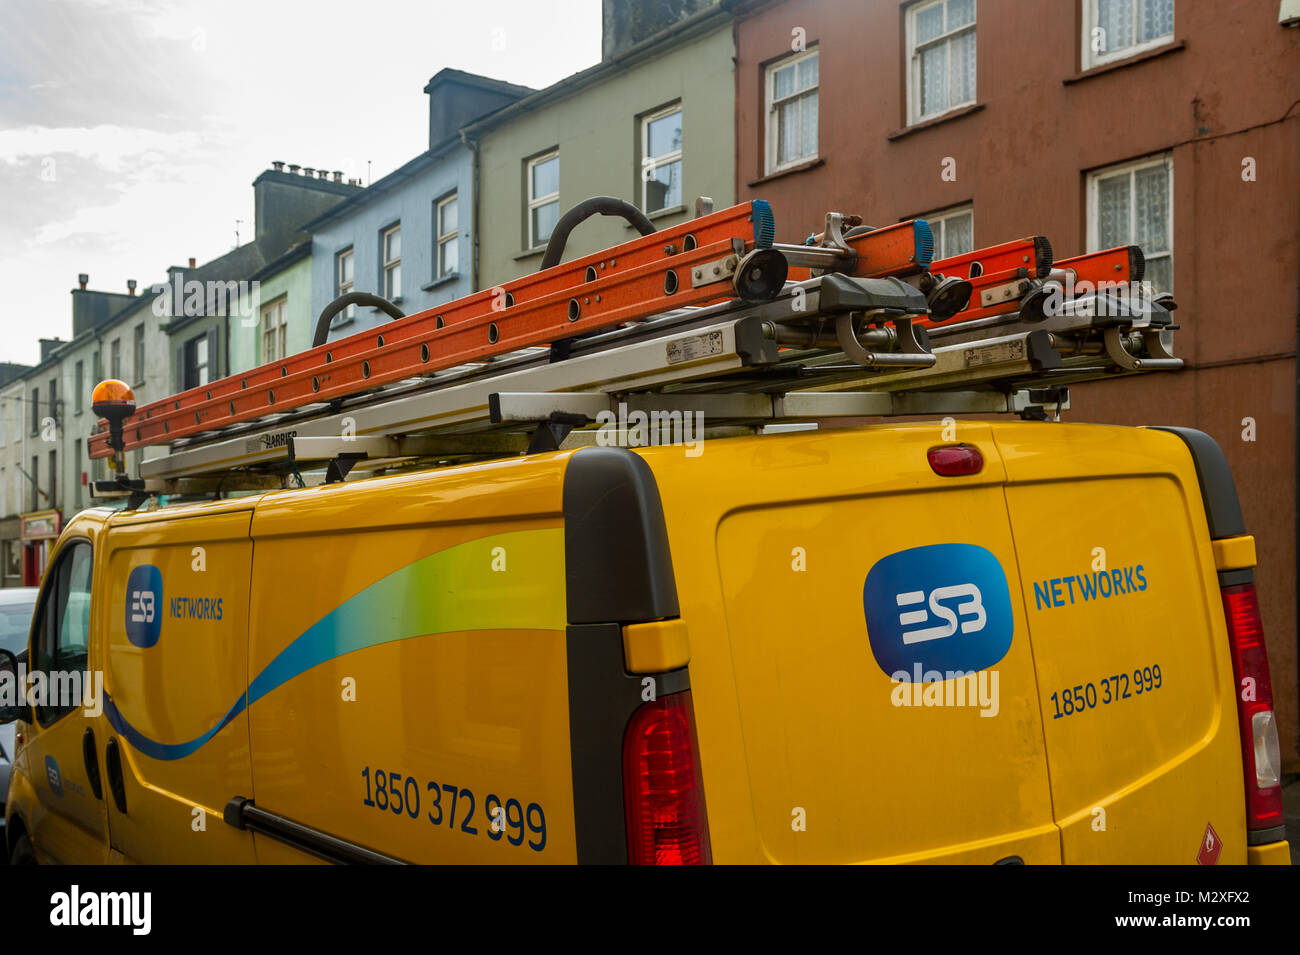 ESB Networks (national Irish electricity company) works van with ladders on roof parked in Skibbereen, County Cork, Ireland. Stock Photo